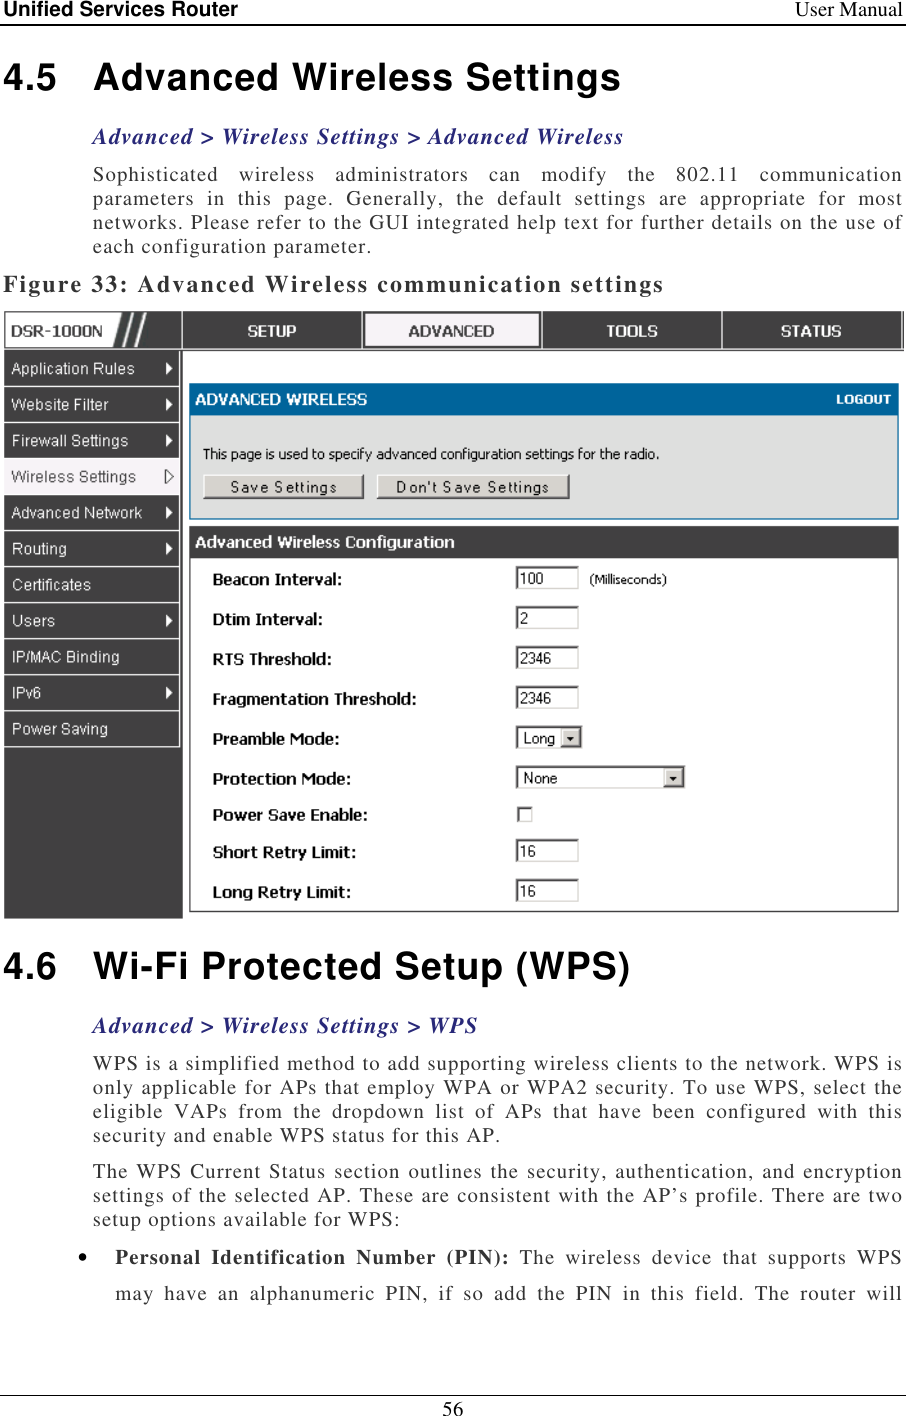 Unified Services Router    User Manual 56  4.5  Advanced Wireless Settings Advanced &gt; Wireless Settings &gt; Advanced Wireless Sophisticated  wireless  administrators  can  modify  the  802.11  communication parameters  in  this  page.  Generally,  the  default  settings  are  appropriate  for  most networks. Please refer to the GUI integrated help text for further details on the use of each configuration parameter.  Figure 33: Advanced Wireless communication settings  4.6  Wi-Fi Protected Setup (WPS) Advanced &gt; Wireless Settings &gt; WPS WPS is a simplified method to add supporting wireless clients to the network. WPS is only applicable for APs that employ WPA or WPA2 security. To use WPS, select the eligible  VAPs  from  the  dropdown  list  of  APs  that  have  been  configured  with  this security and enable WPS status for this AP.  The WPS Current  Status section outlines  the security, authentication, and encryption settings of the selected AP. These are consistent with the AP’s profile. There are two setup options available for WPS: • Personal  Identification  Number  (PIN):  The  wireless  device  that  supports  WPS may  have  an  alphanumeric  PIN,  if  so  add  the  PIN  in  this  field.  The  router  will 